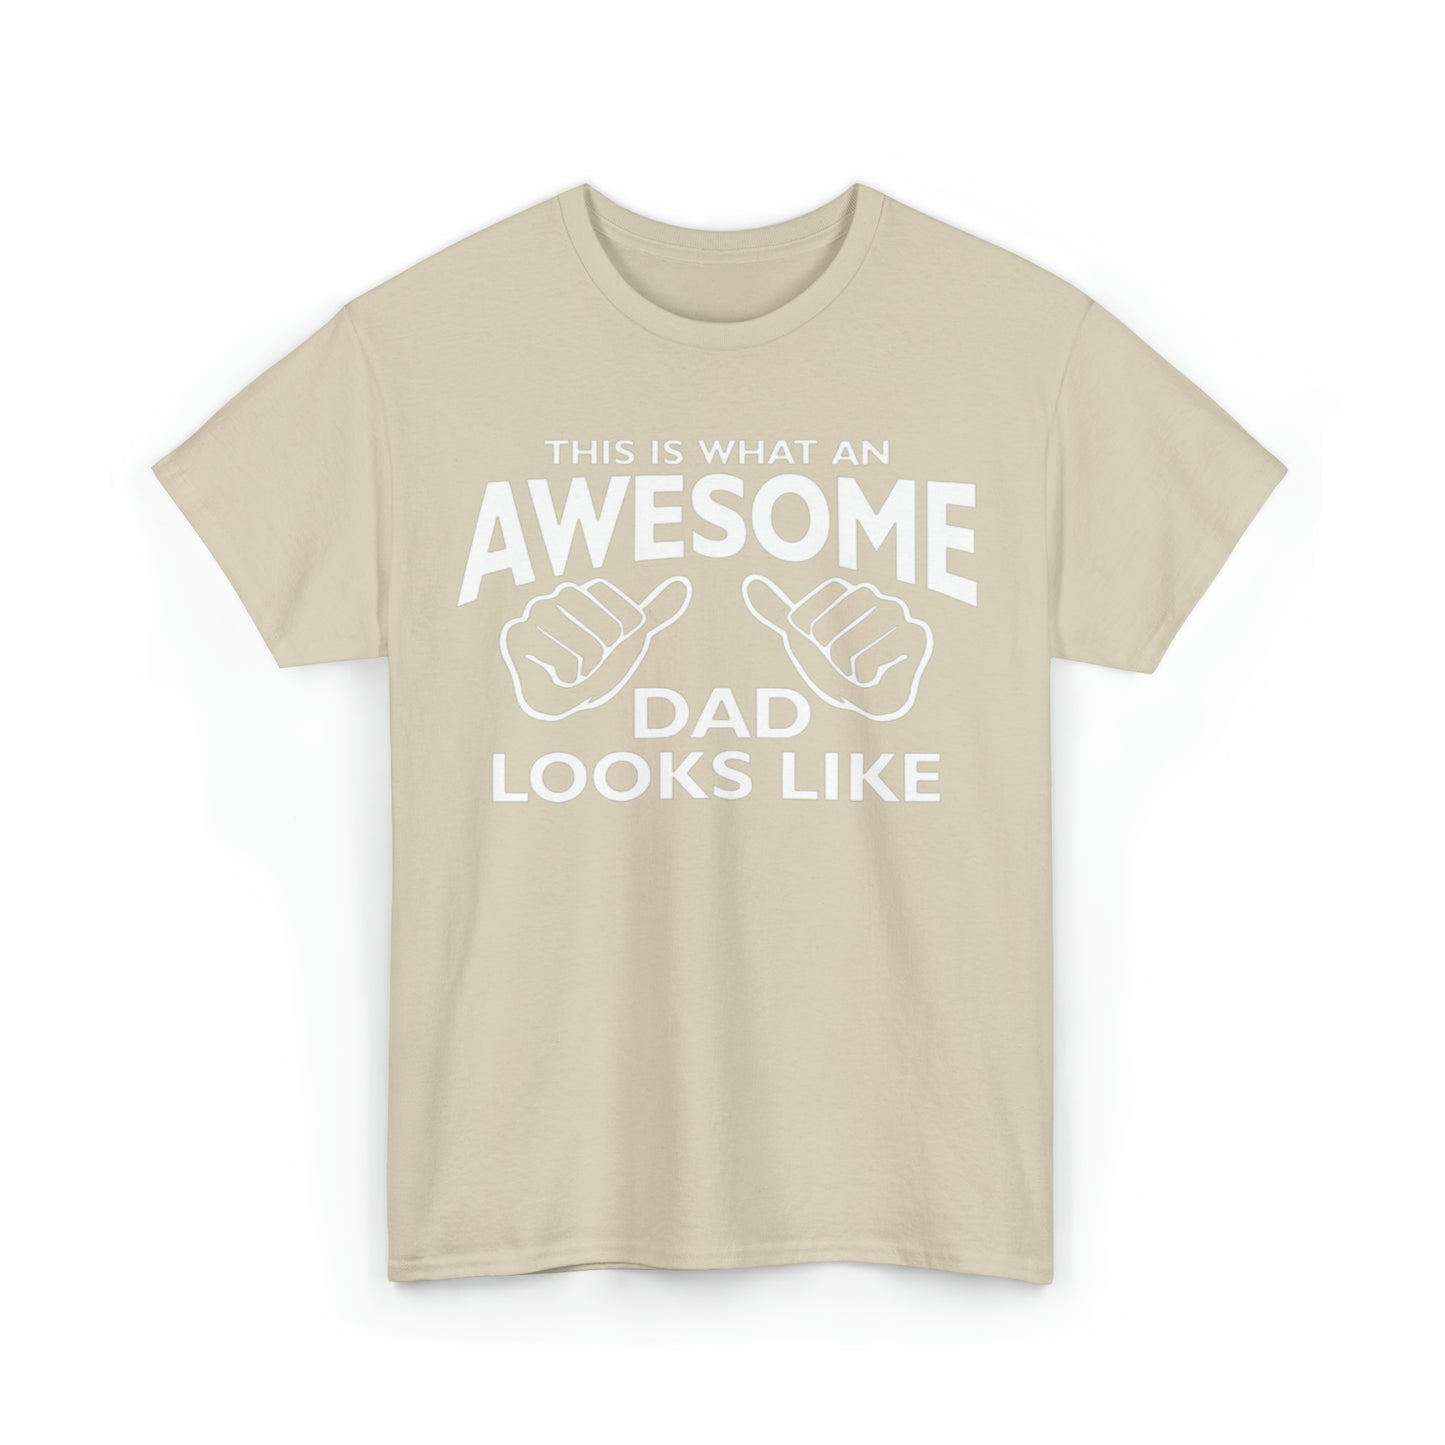 This is What Awesome Dad Looks Like Tshirt, Father's Day Tshirt